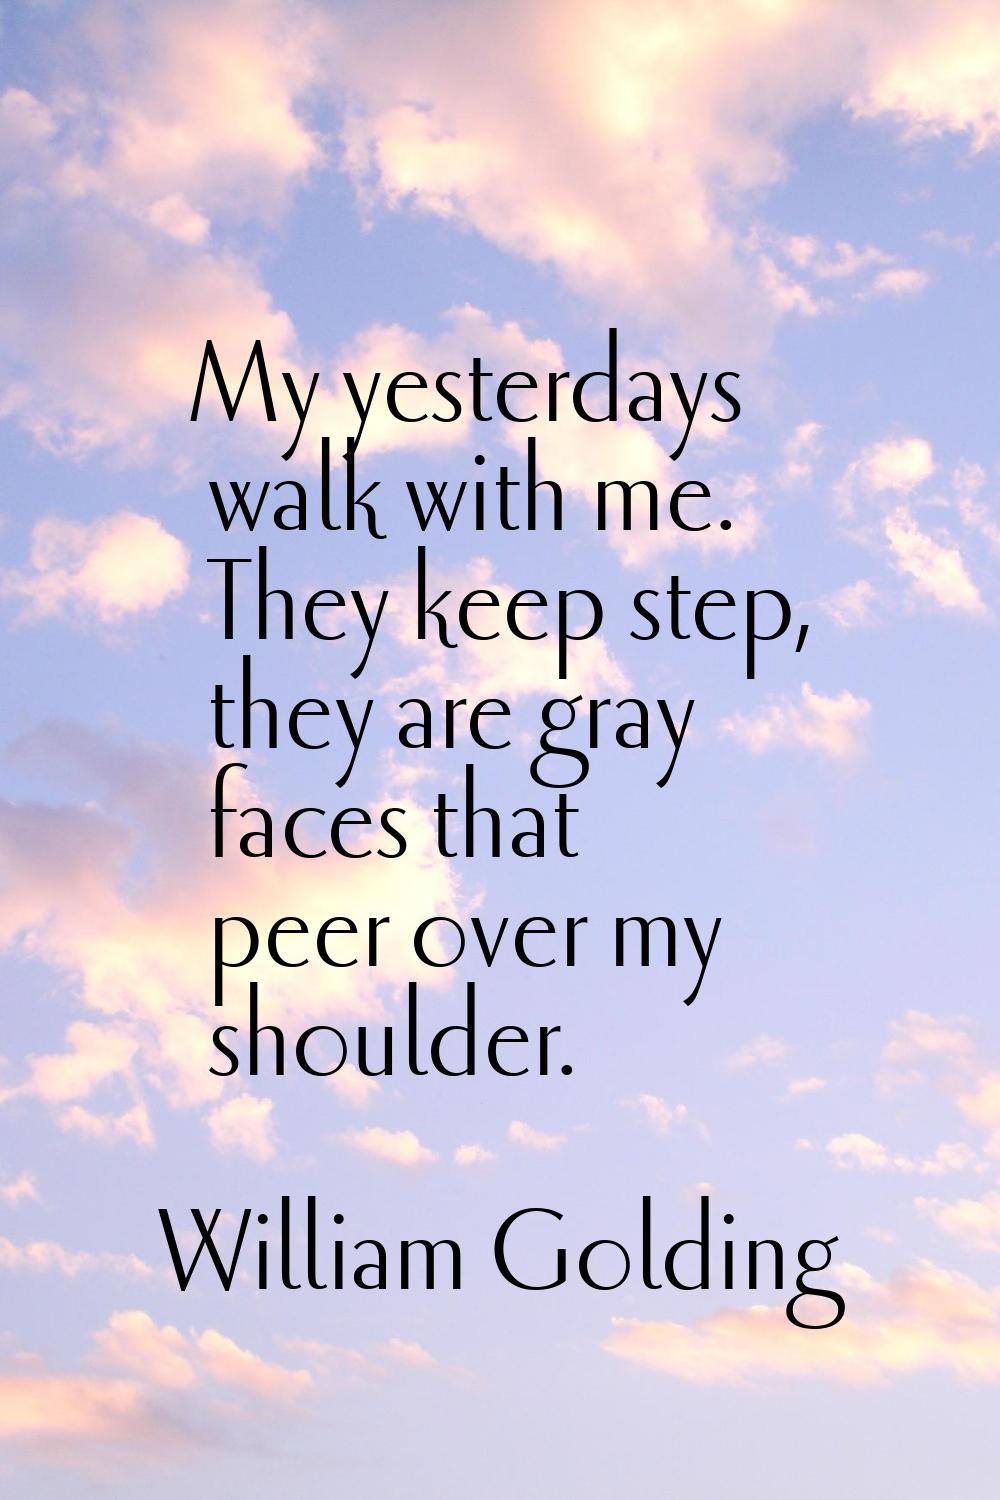 My yesterdays walk with me. They keep step, they are gray faces that peer over my shoulder.